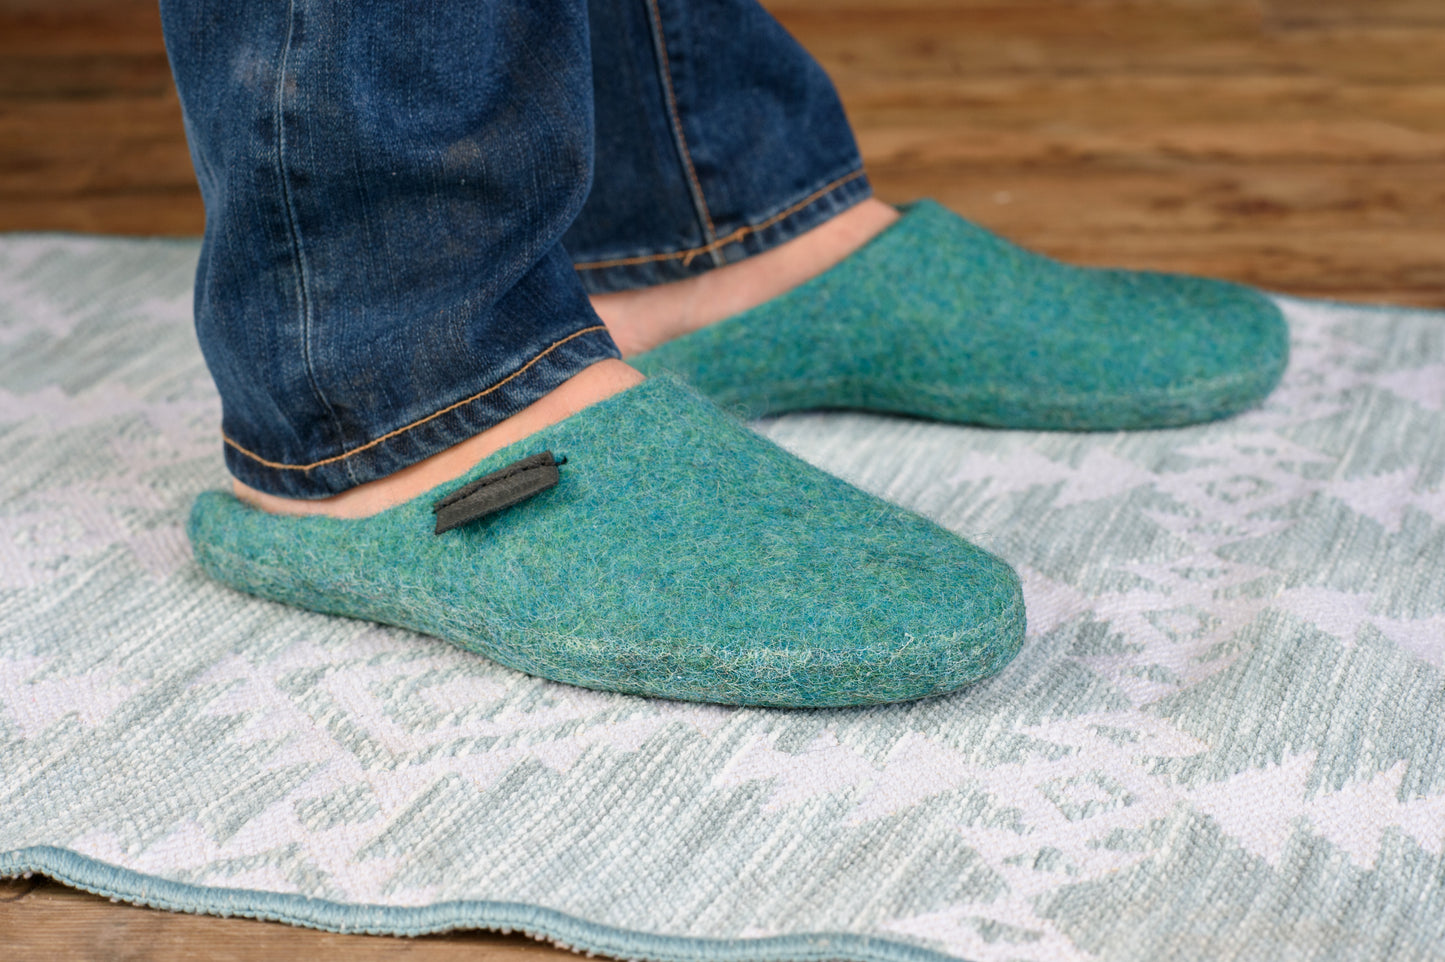 Green Turquoise closed toe slippers on mens feet, Men is standing on the patterned rug